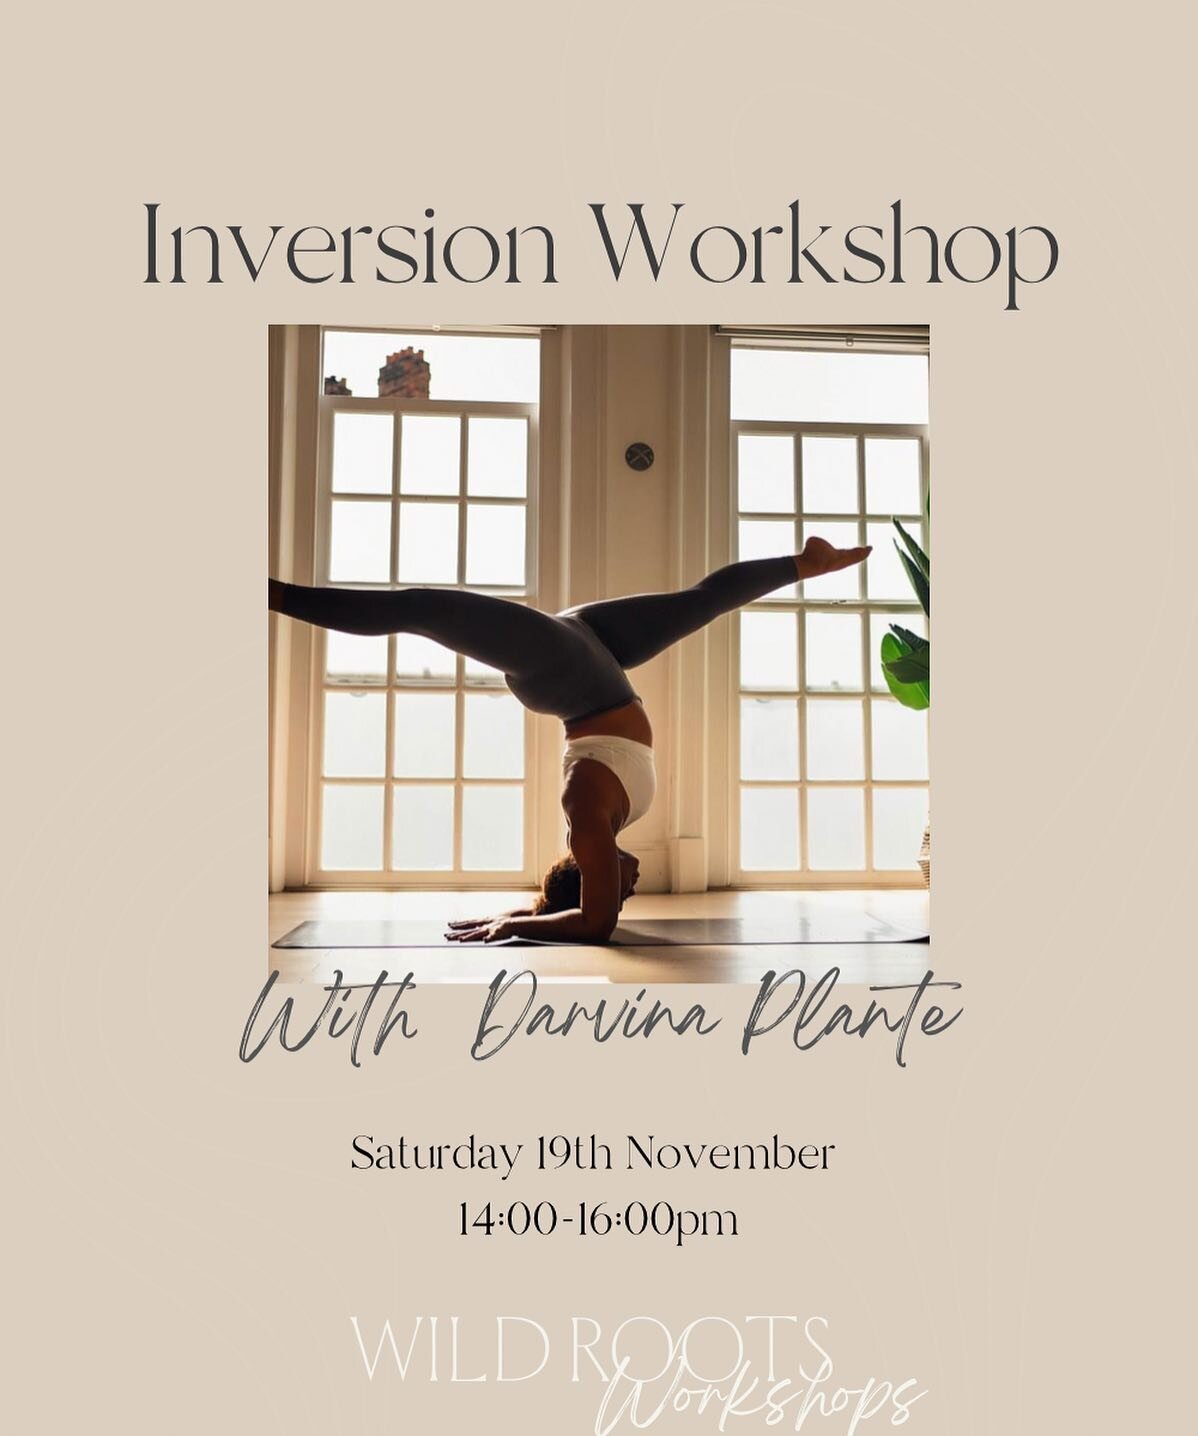 INVERSION WORKSHOP
With @darvinaplanteyoga 
Saturday 19th November 
2-4pm 

Want to learn to get upside down? 
In this workshop you will learn everything you need from the fundamentals to strength drills to feel confident in your inversion journey! 
